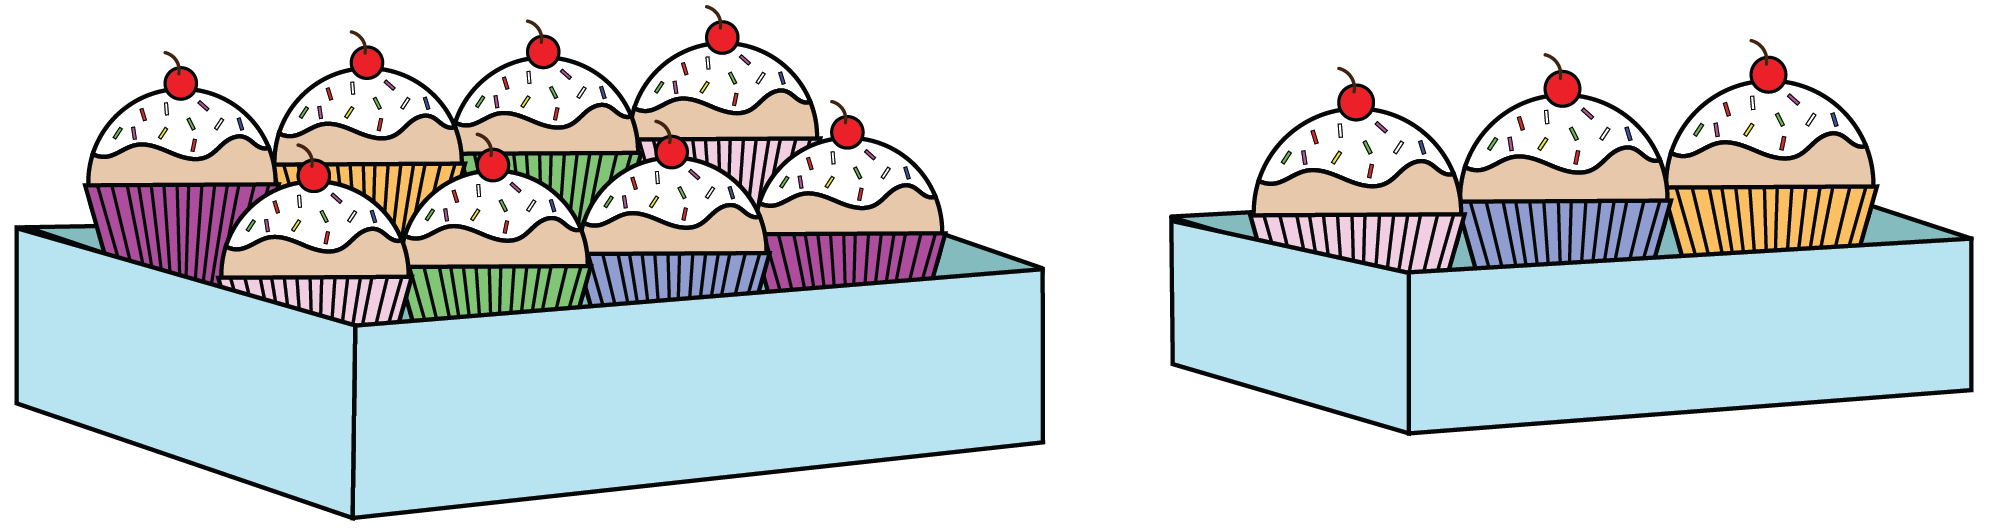 A regular box of cupcakes and a small box of cupcakes